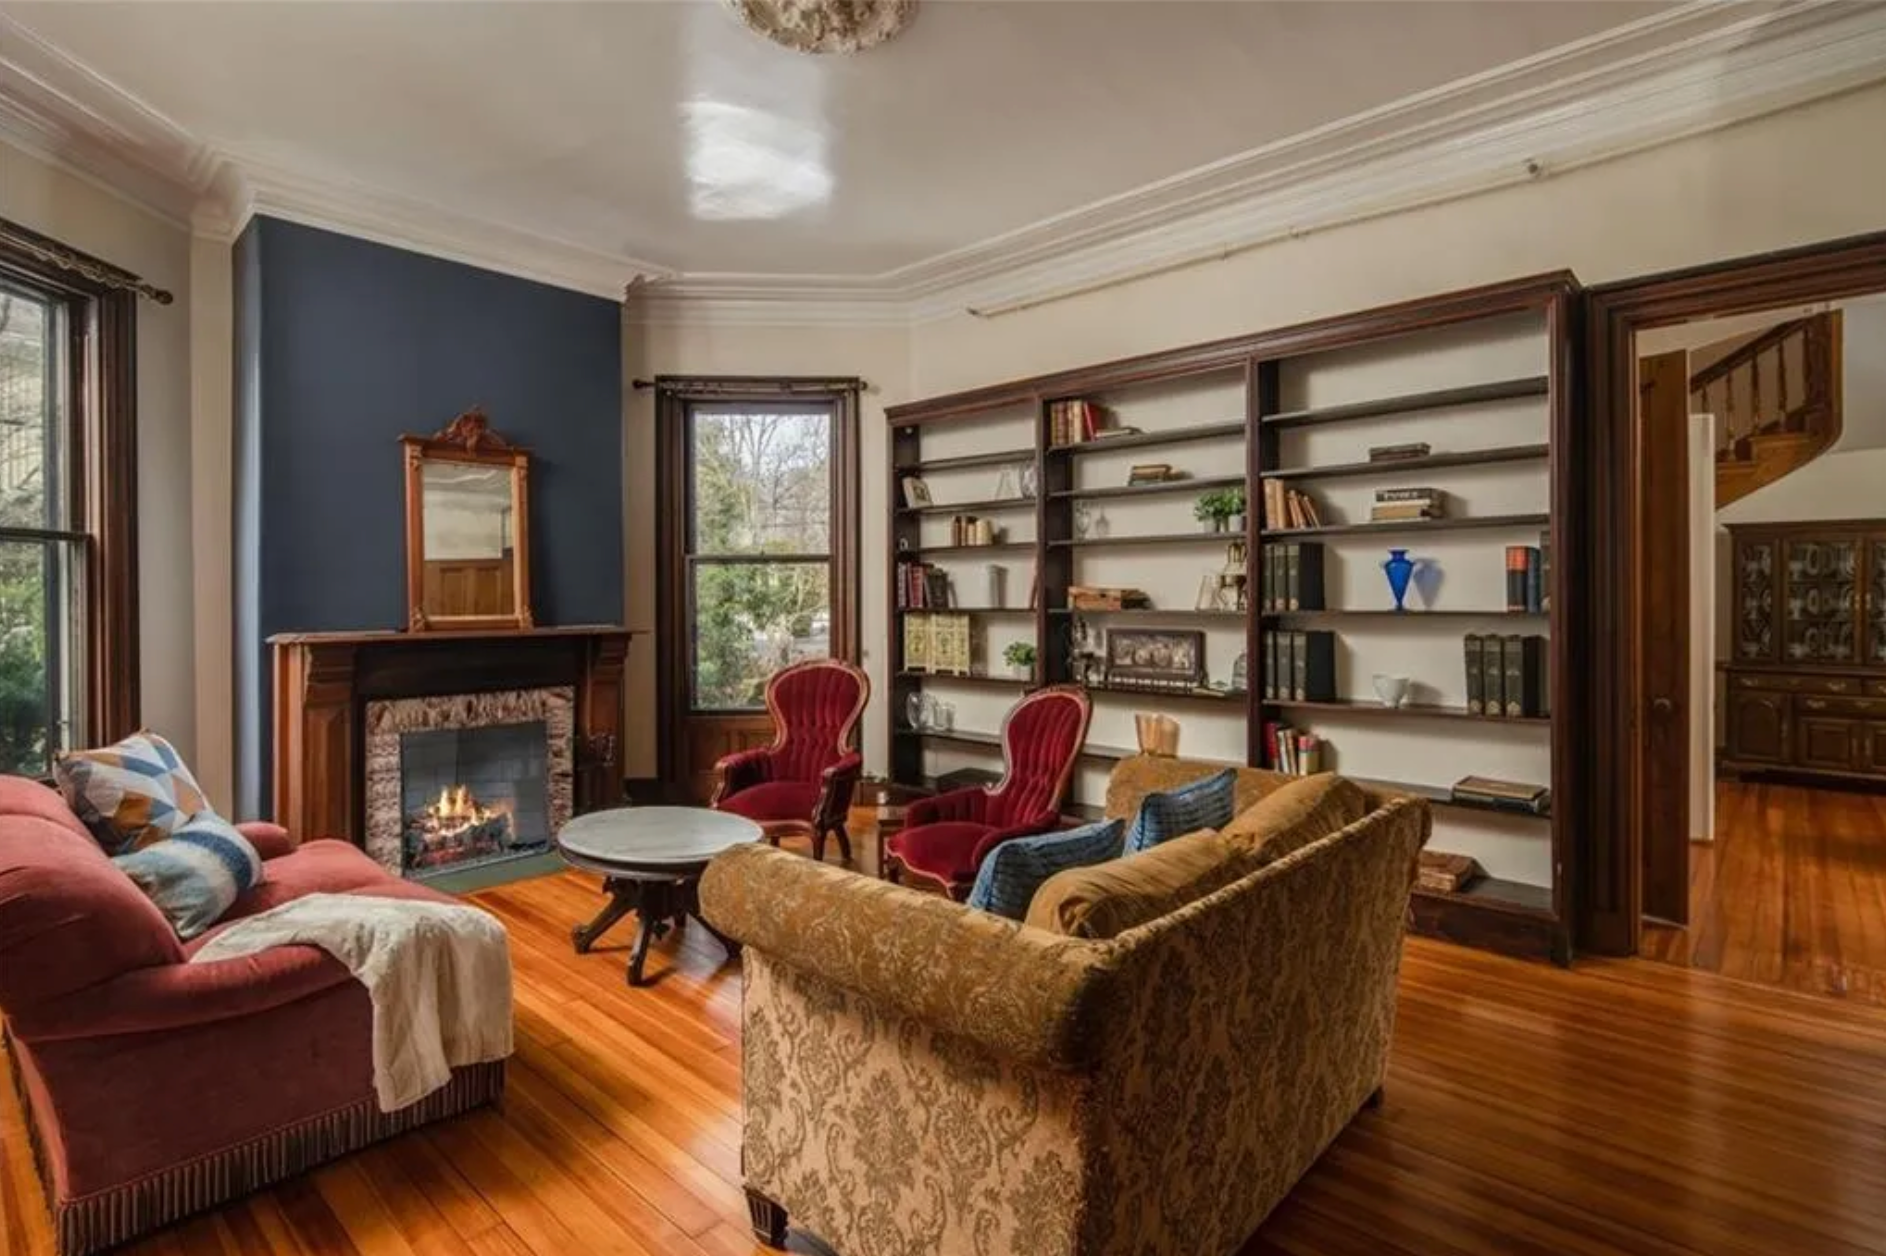 The living room has built-in shelving and a dark blue accent wall, as well as a gas fireplace and hardwood floors.